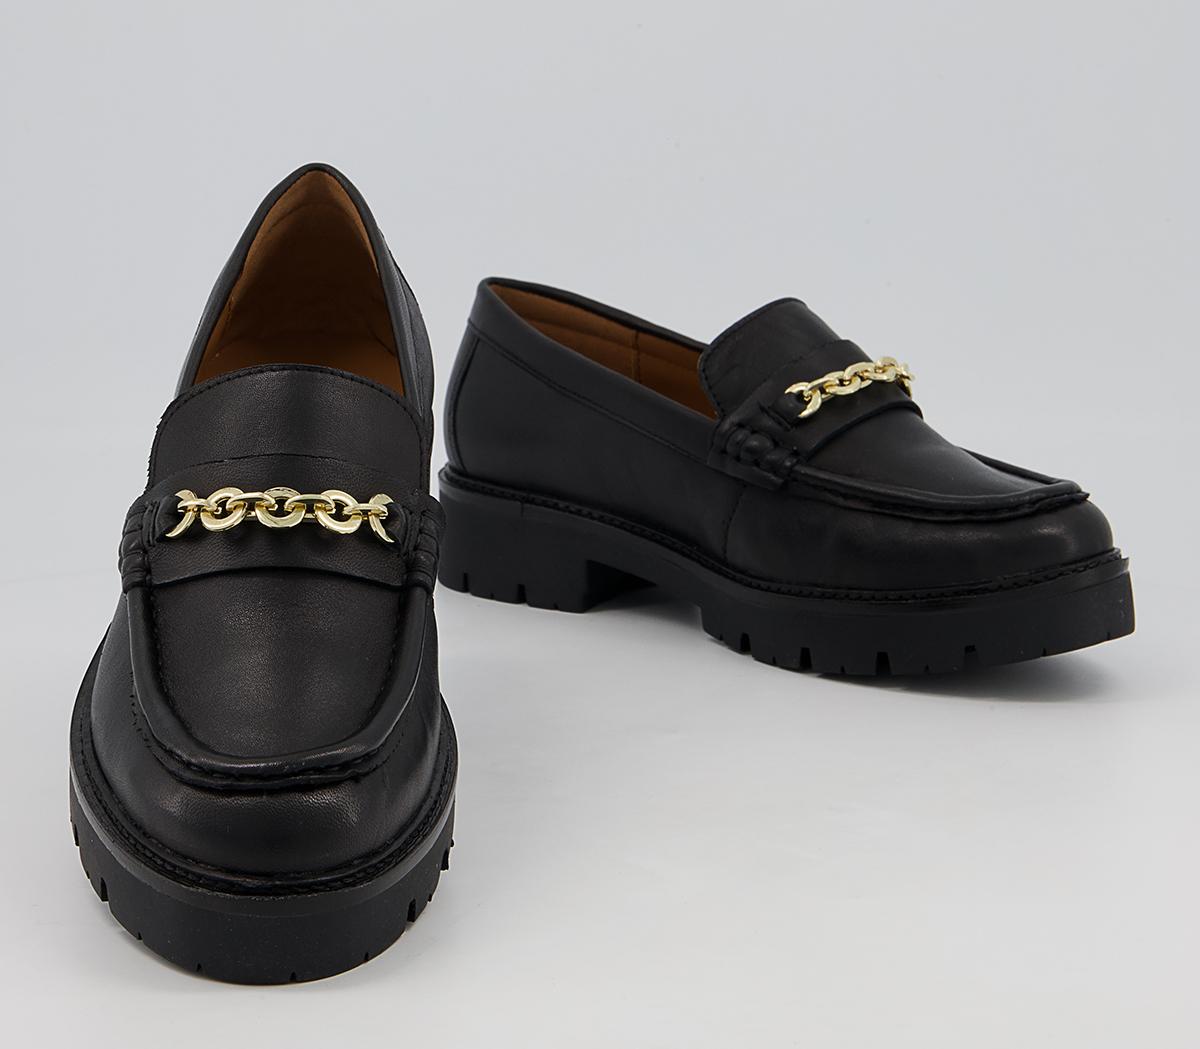 OFFICE Frame Chunky Loafers Black Leather - Flat Shoes for Women